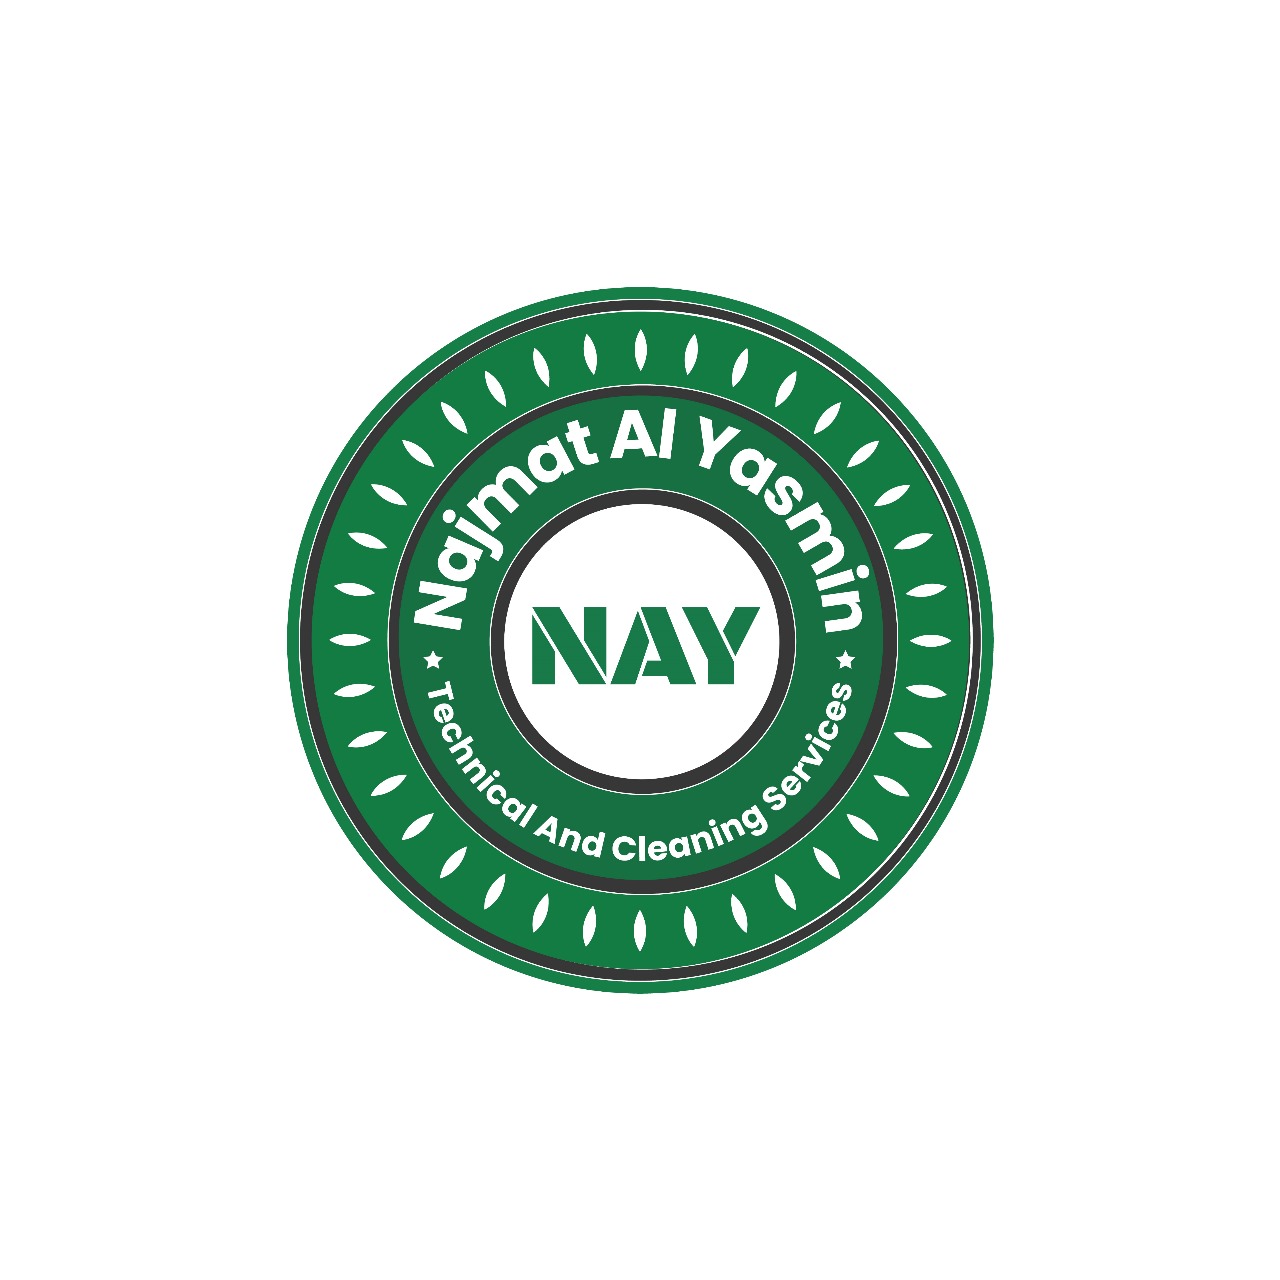 NAY TECHNICAL & CLEANING SERVICES